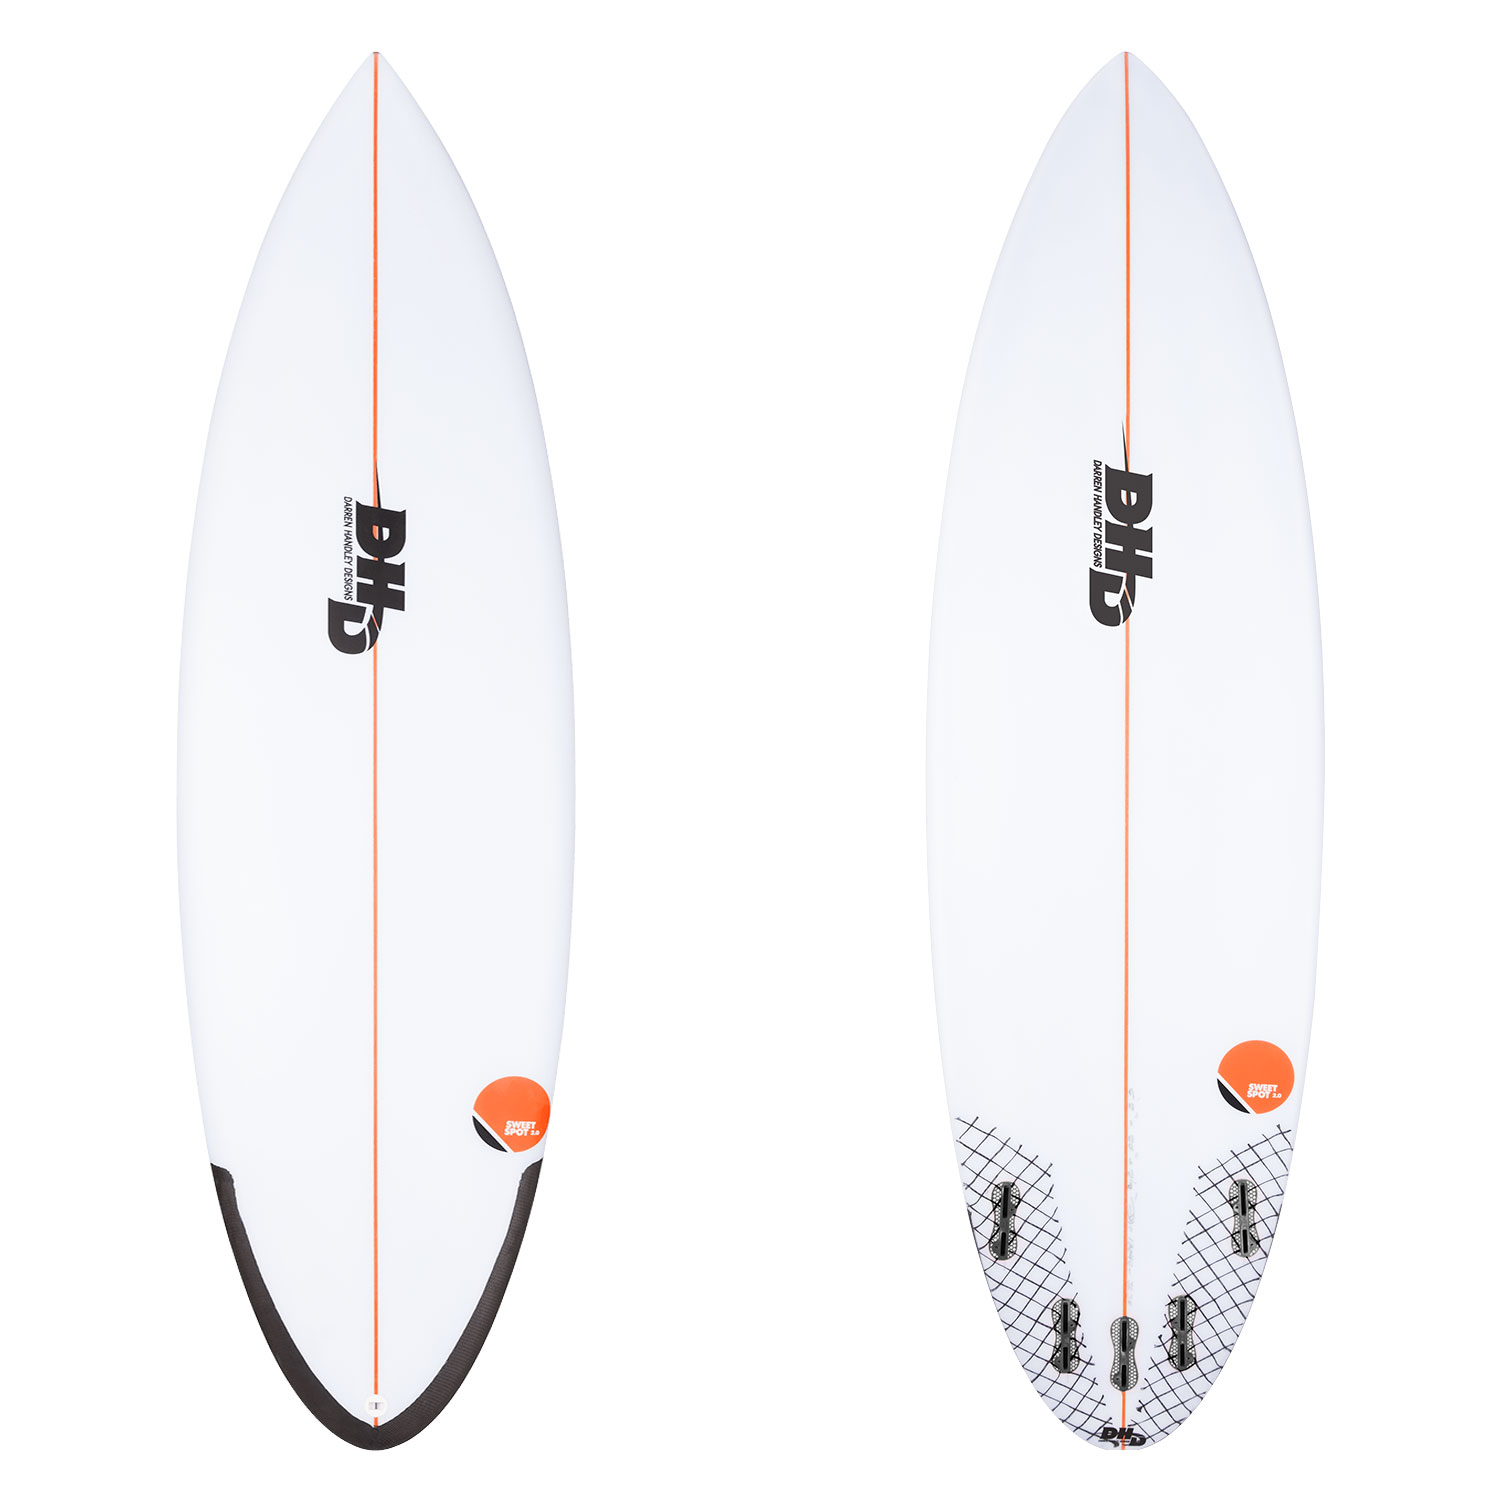 DHD Surfboards - Sweet Spot 2 Review